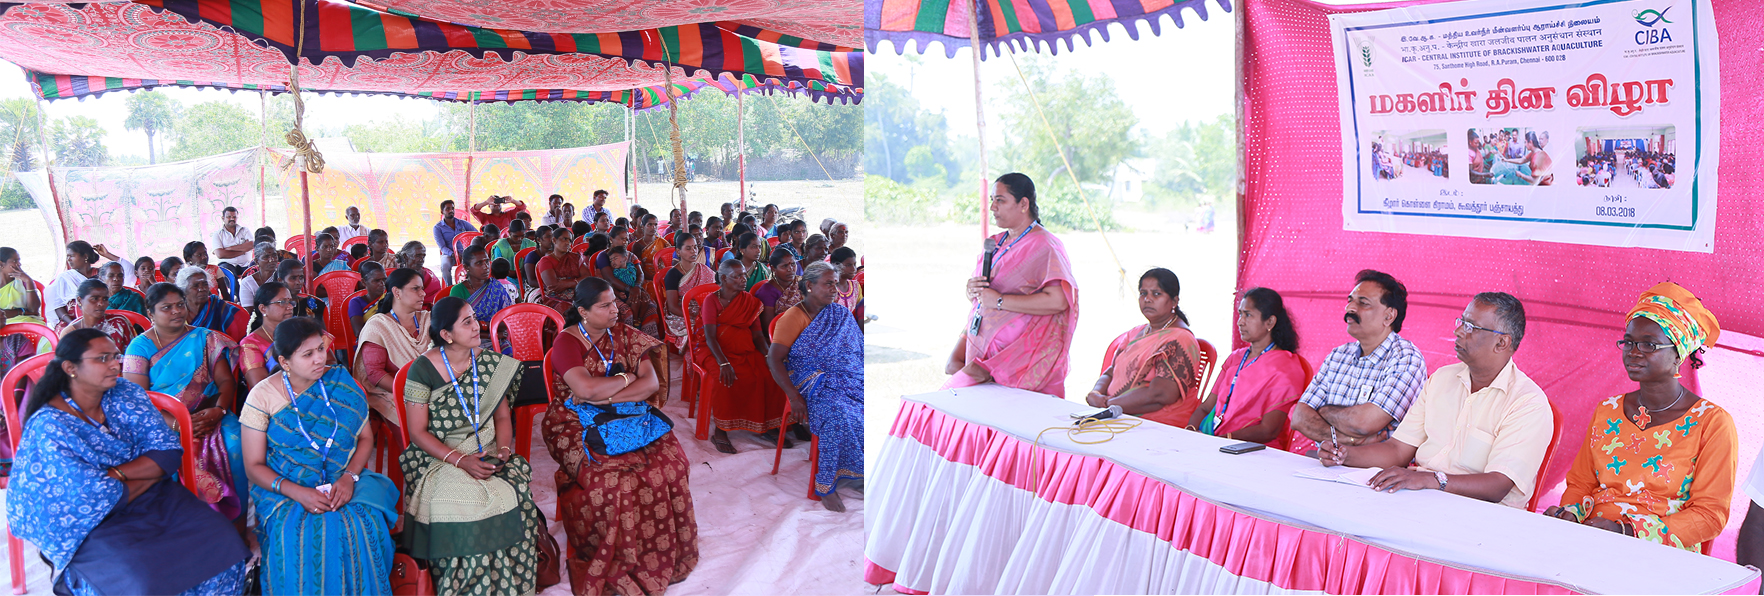 ICAR CIBA Celebrated World Women’s Day at Koovathur village with farm women with the theme Empowerment through Brackishwater Aquaculture Farming - 8th March 2018